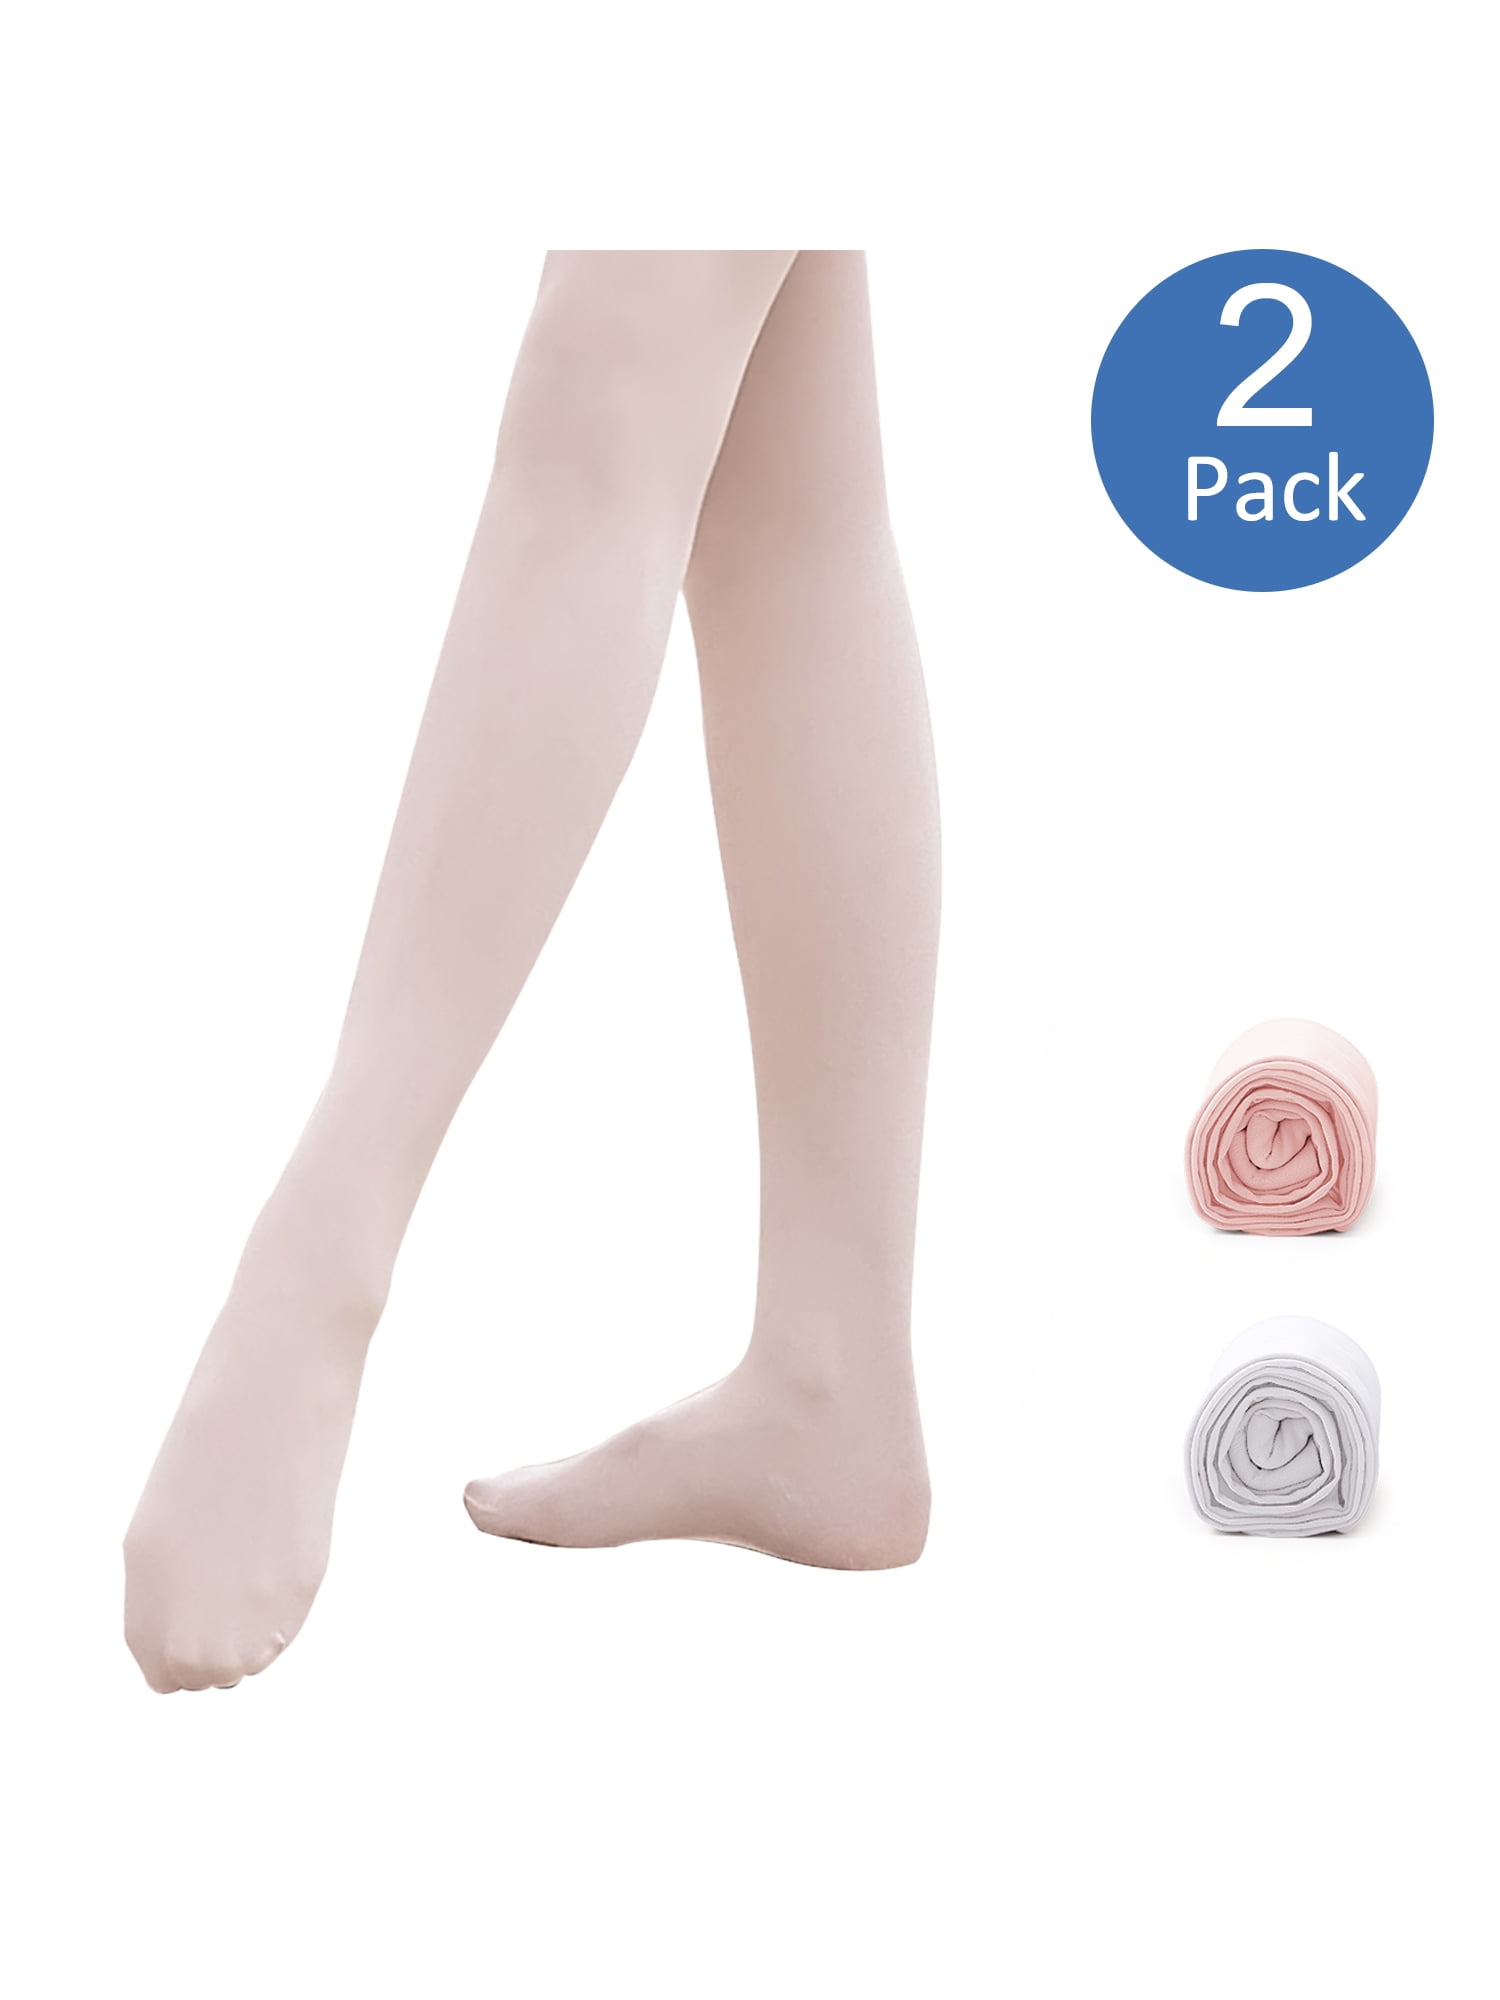 2 Pair Silky Toes Girls' Ultra Soft Pro Dance Tights/Ballet Stocking Footed Tights